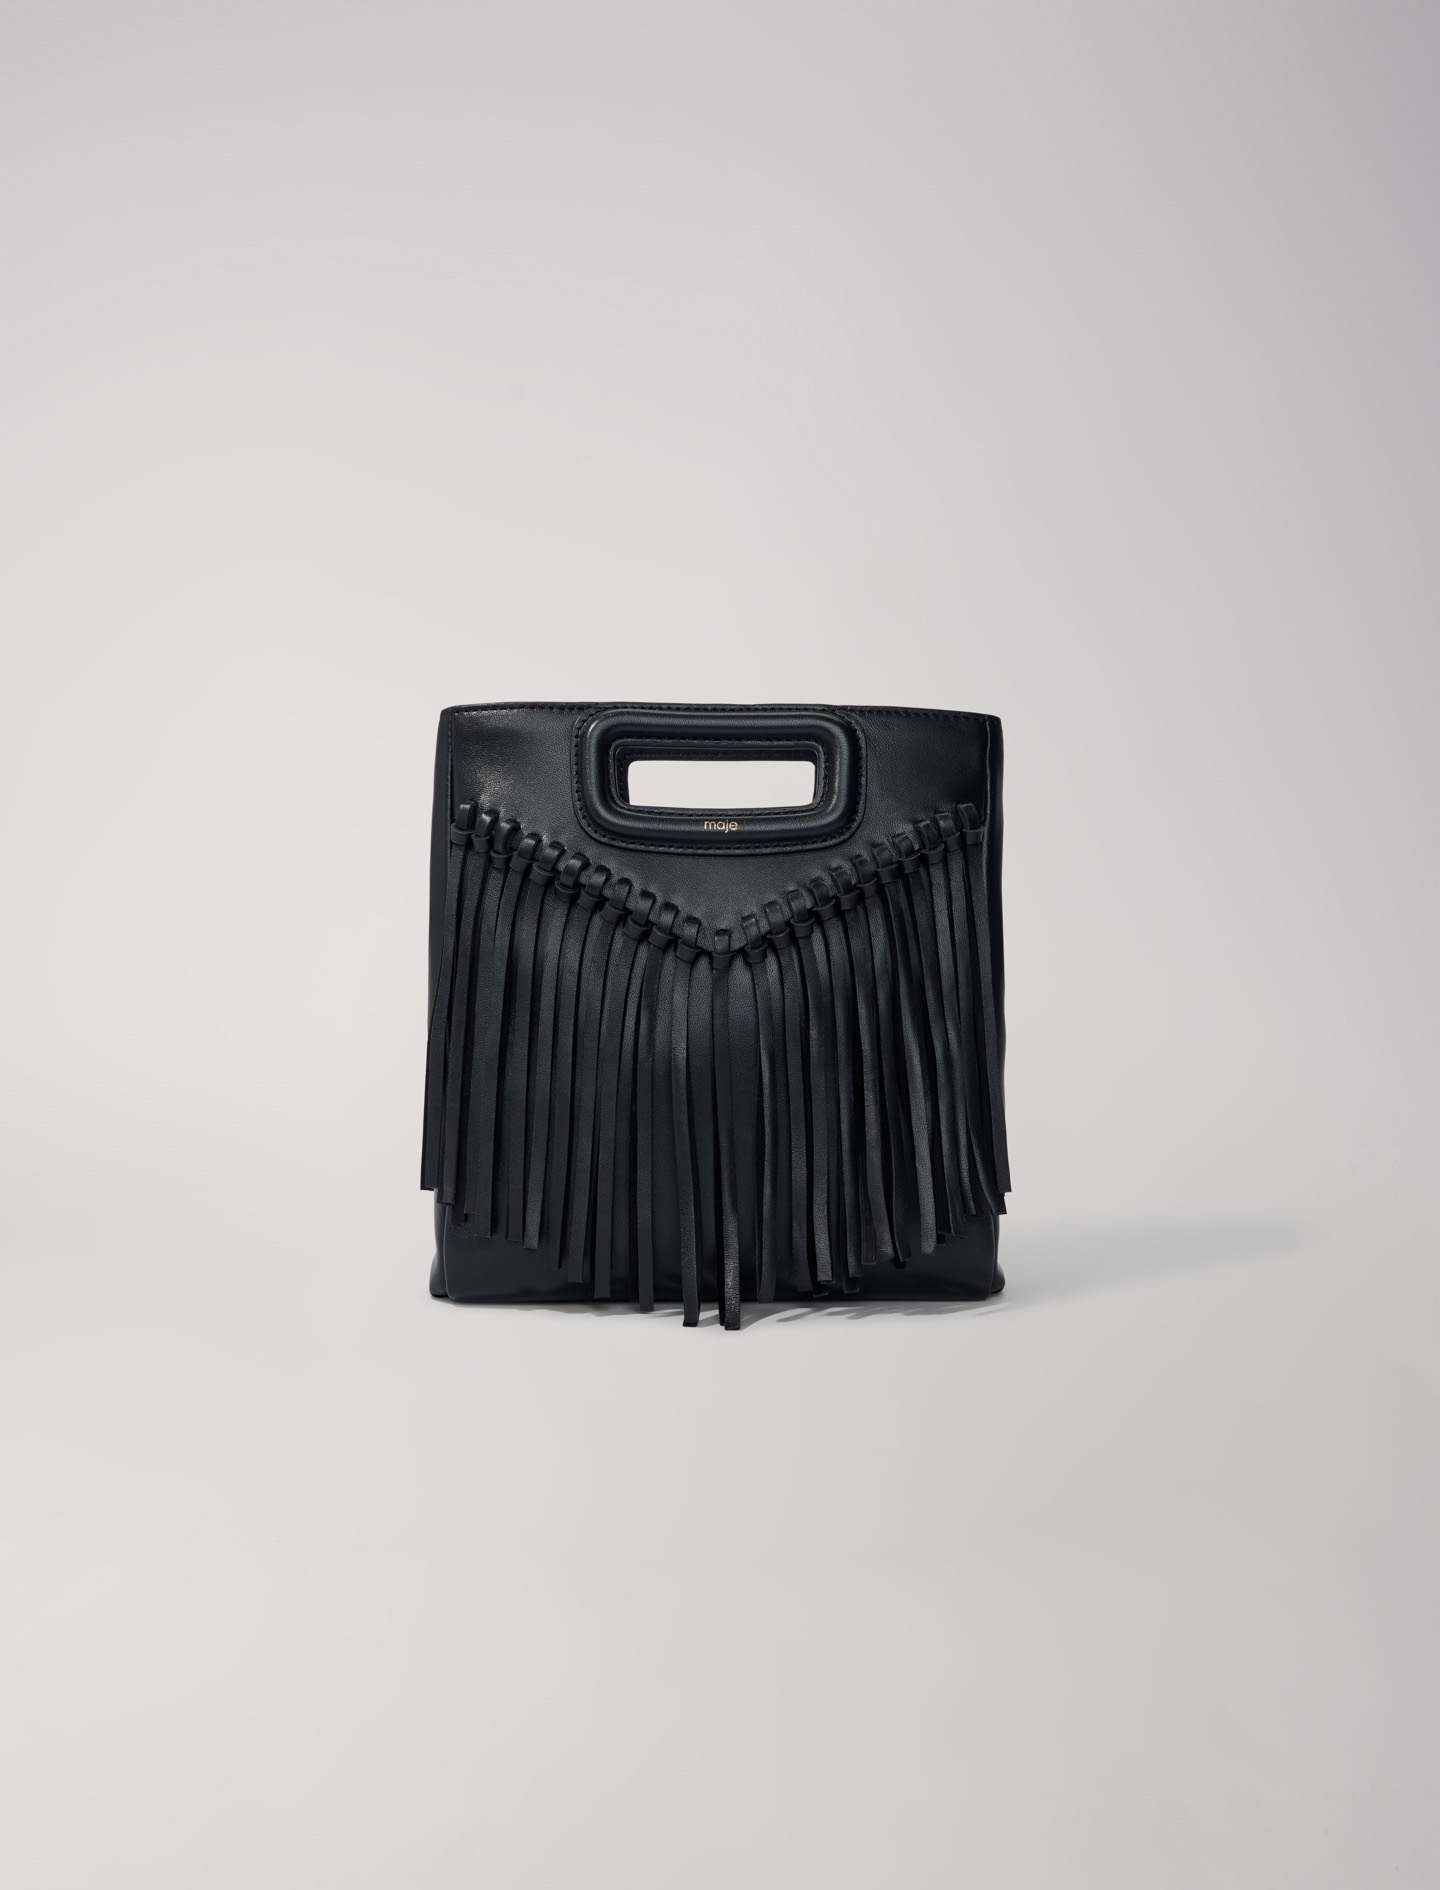 Mixte's polyester Fringed leather M bag for Spring/Summer, size Mixte-All Bags-OS (ONE SIZE), in color Black / Black